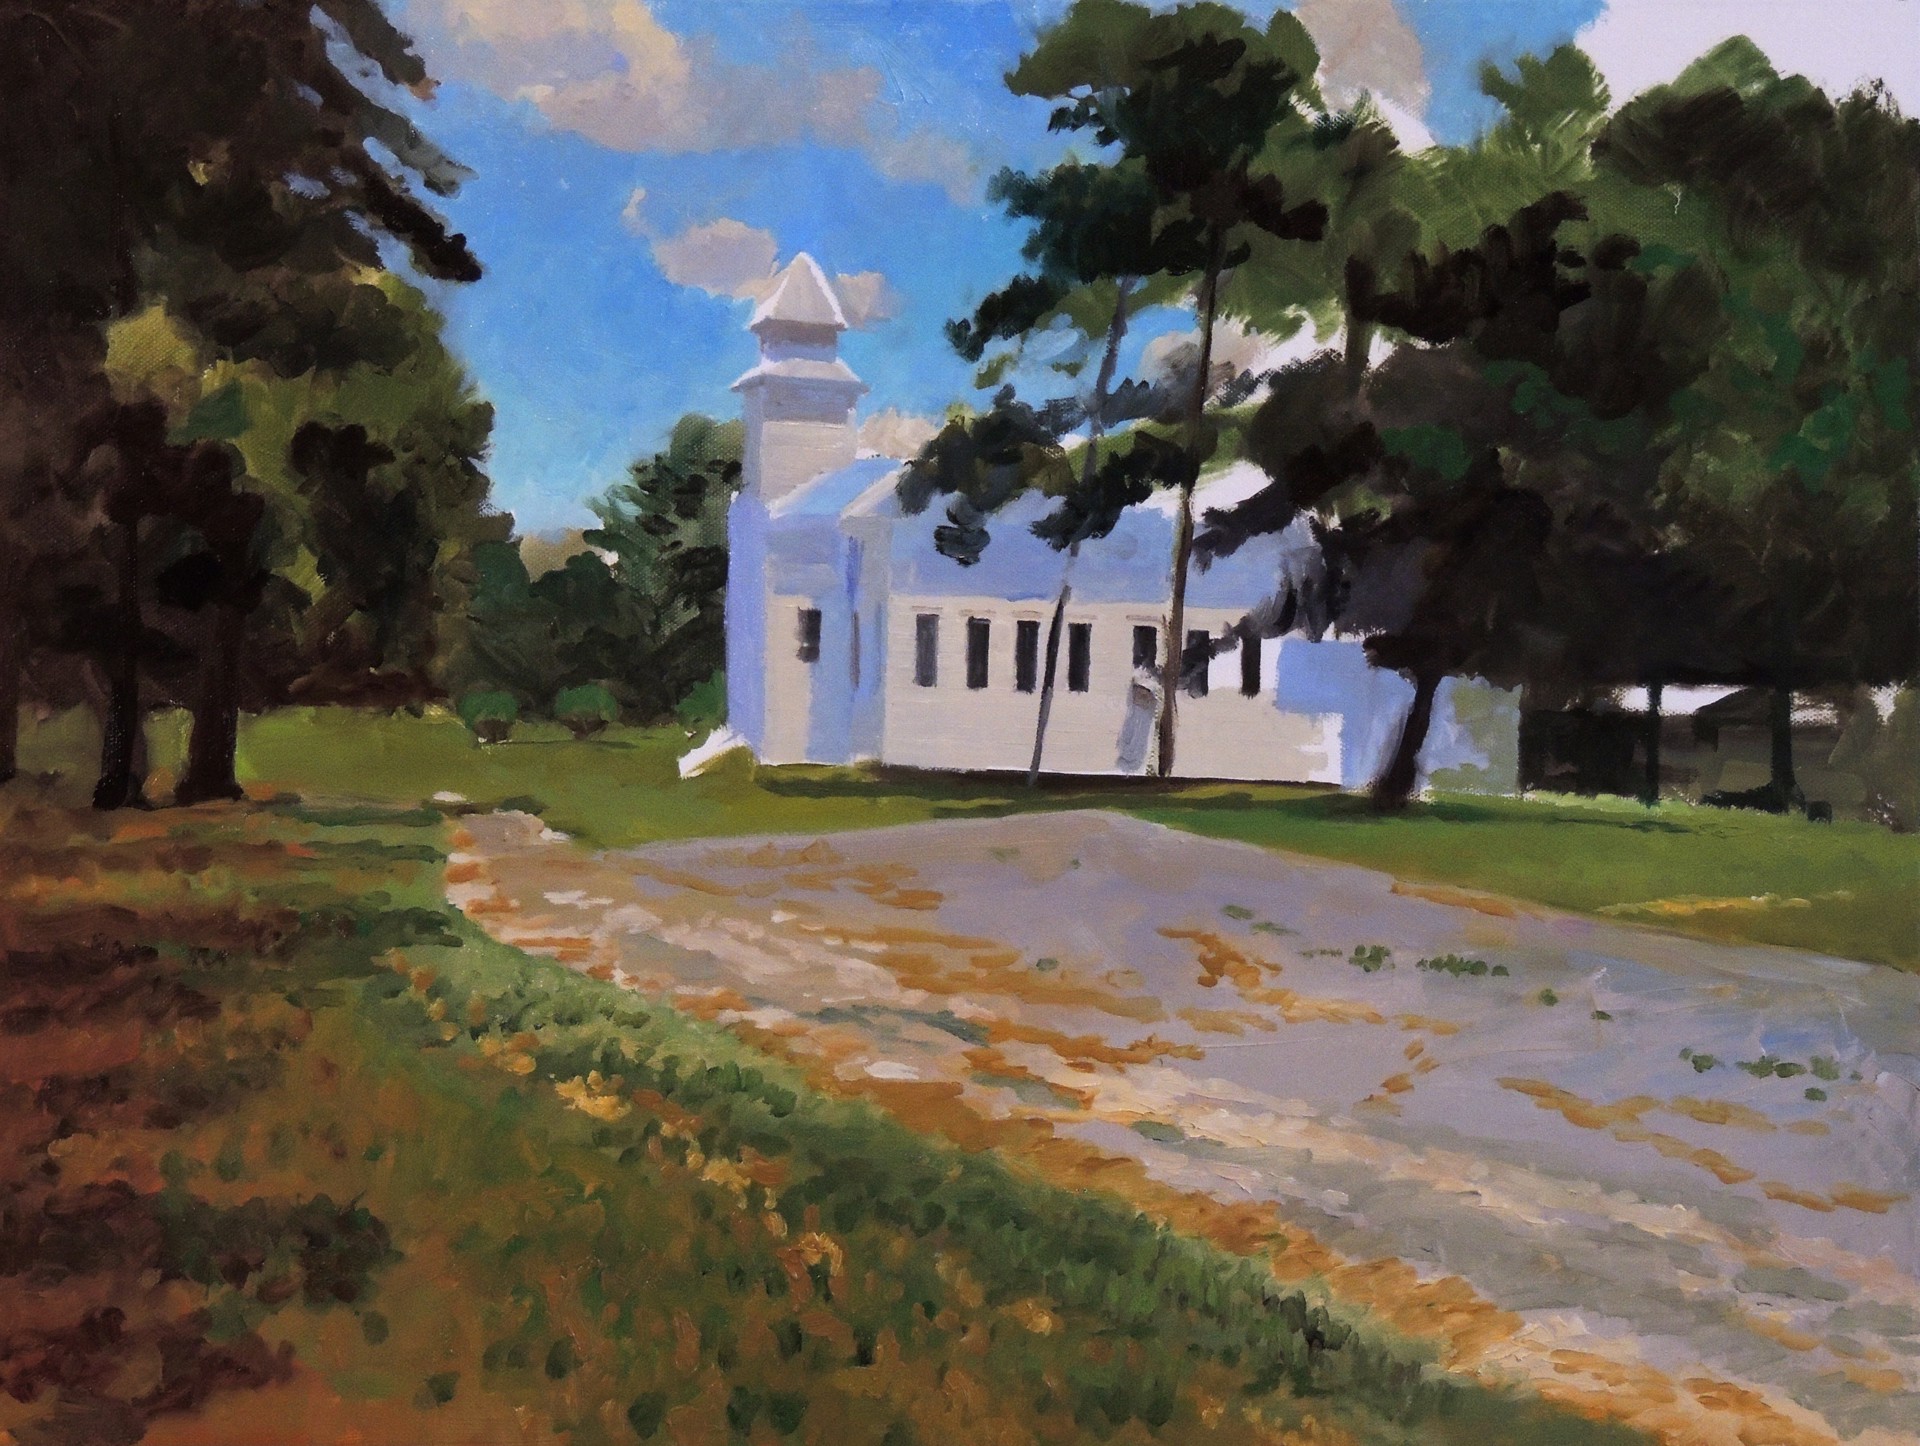 Pine Grove Church of Christ by Lee Jamison